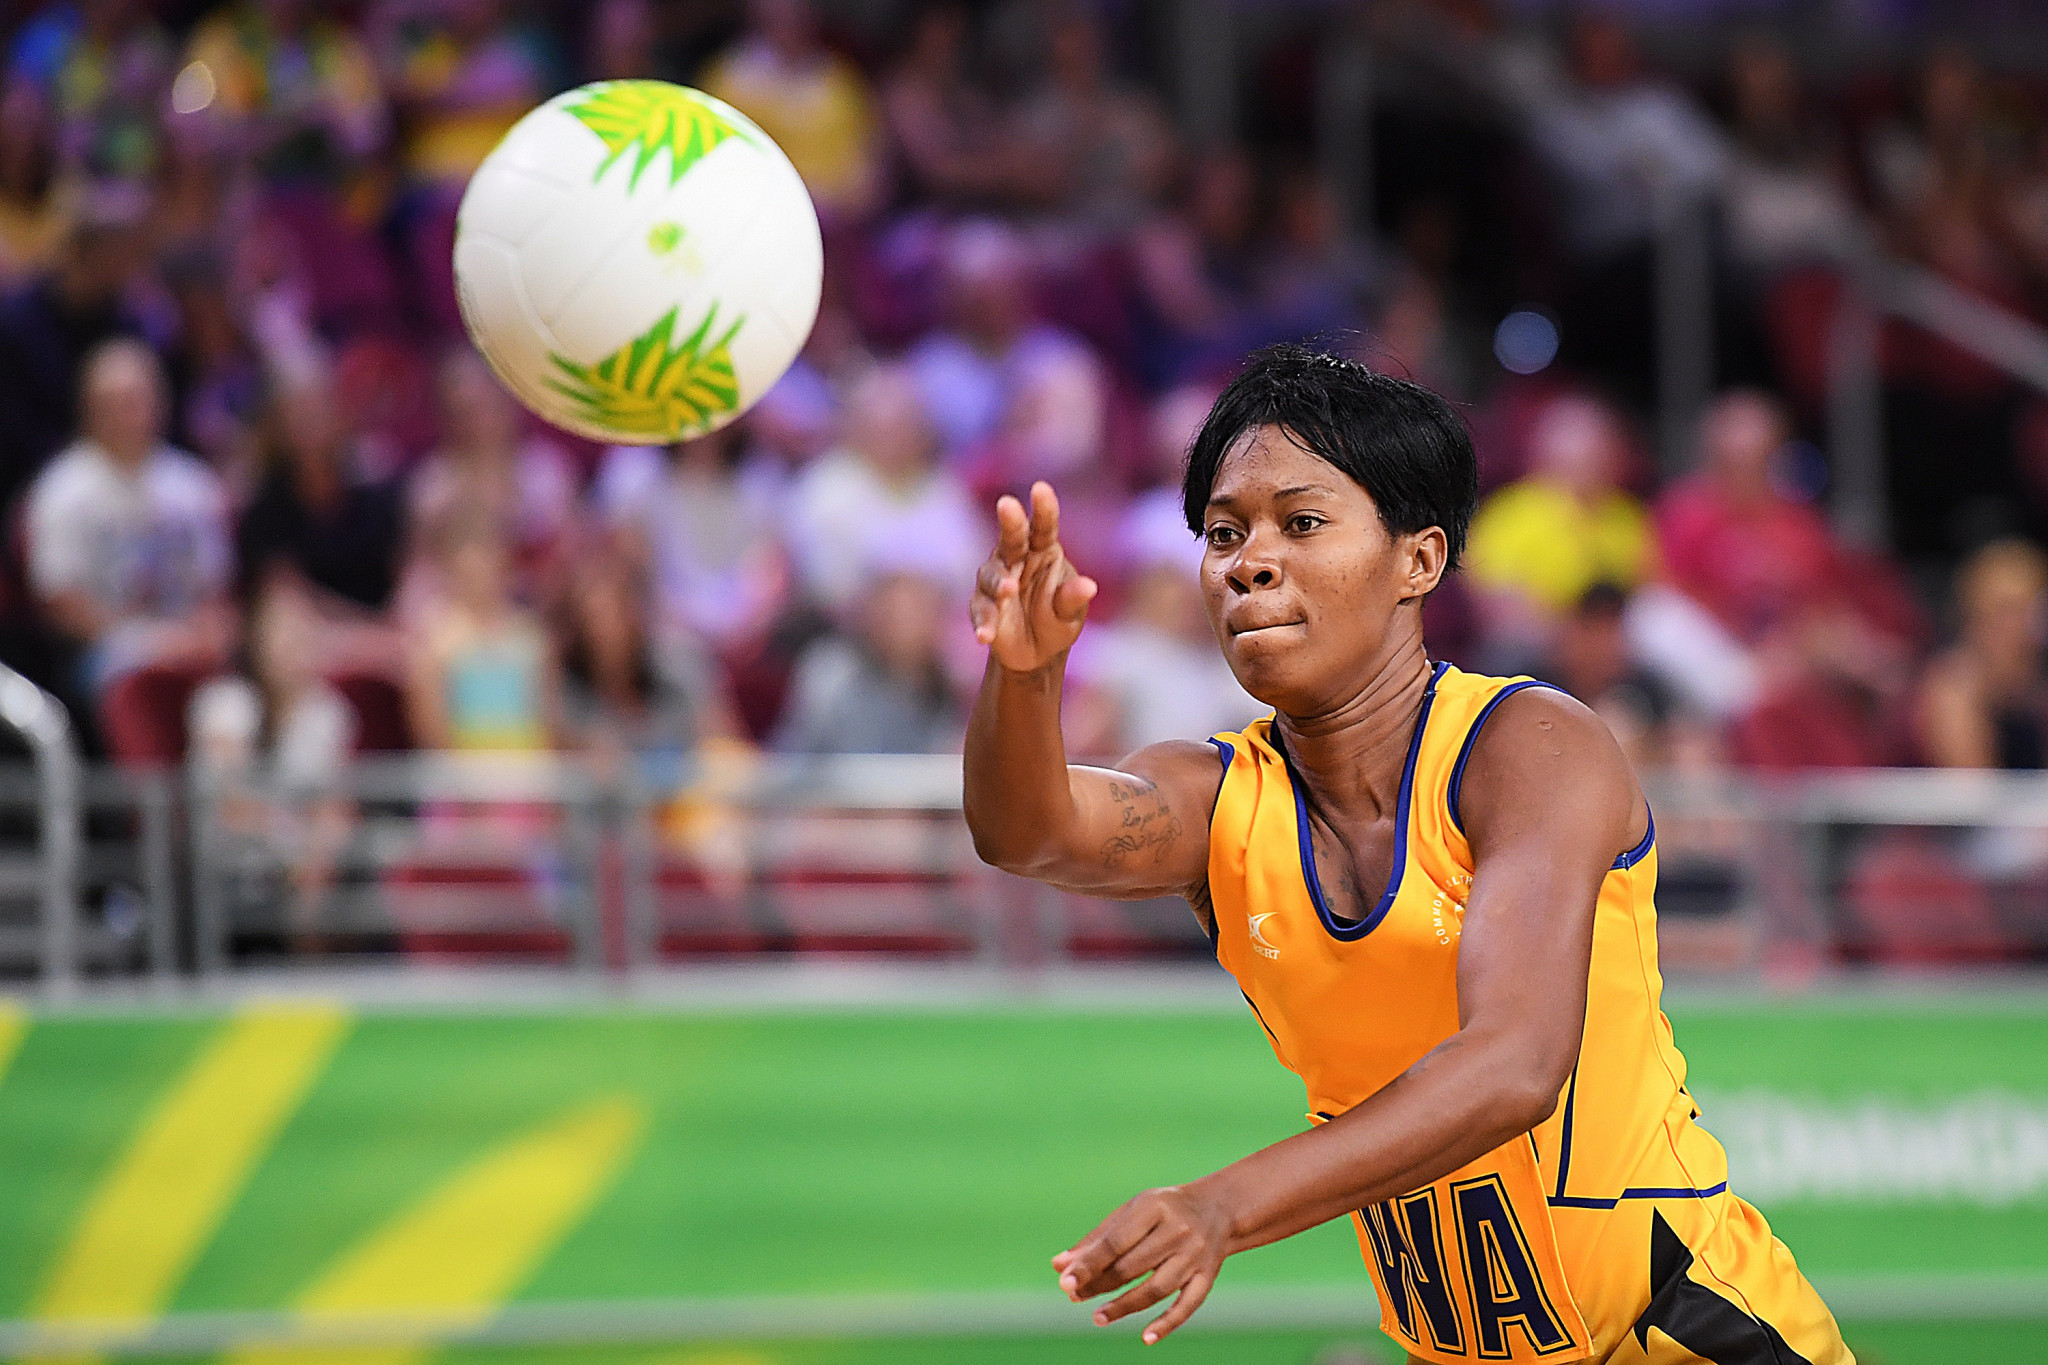 Barbados are hoping their netball team will qualify for Birmingham 2022 but COVID-19 has hindered preparations ©Getty Images